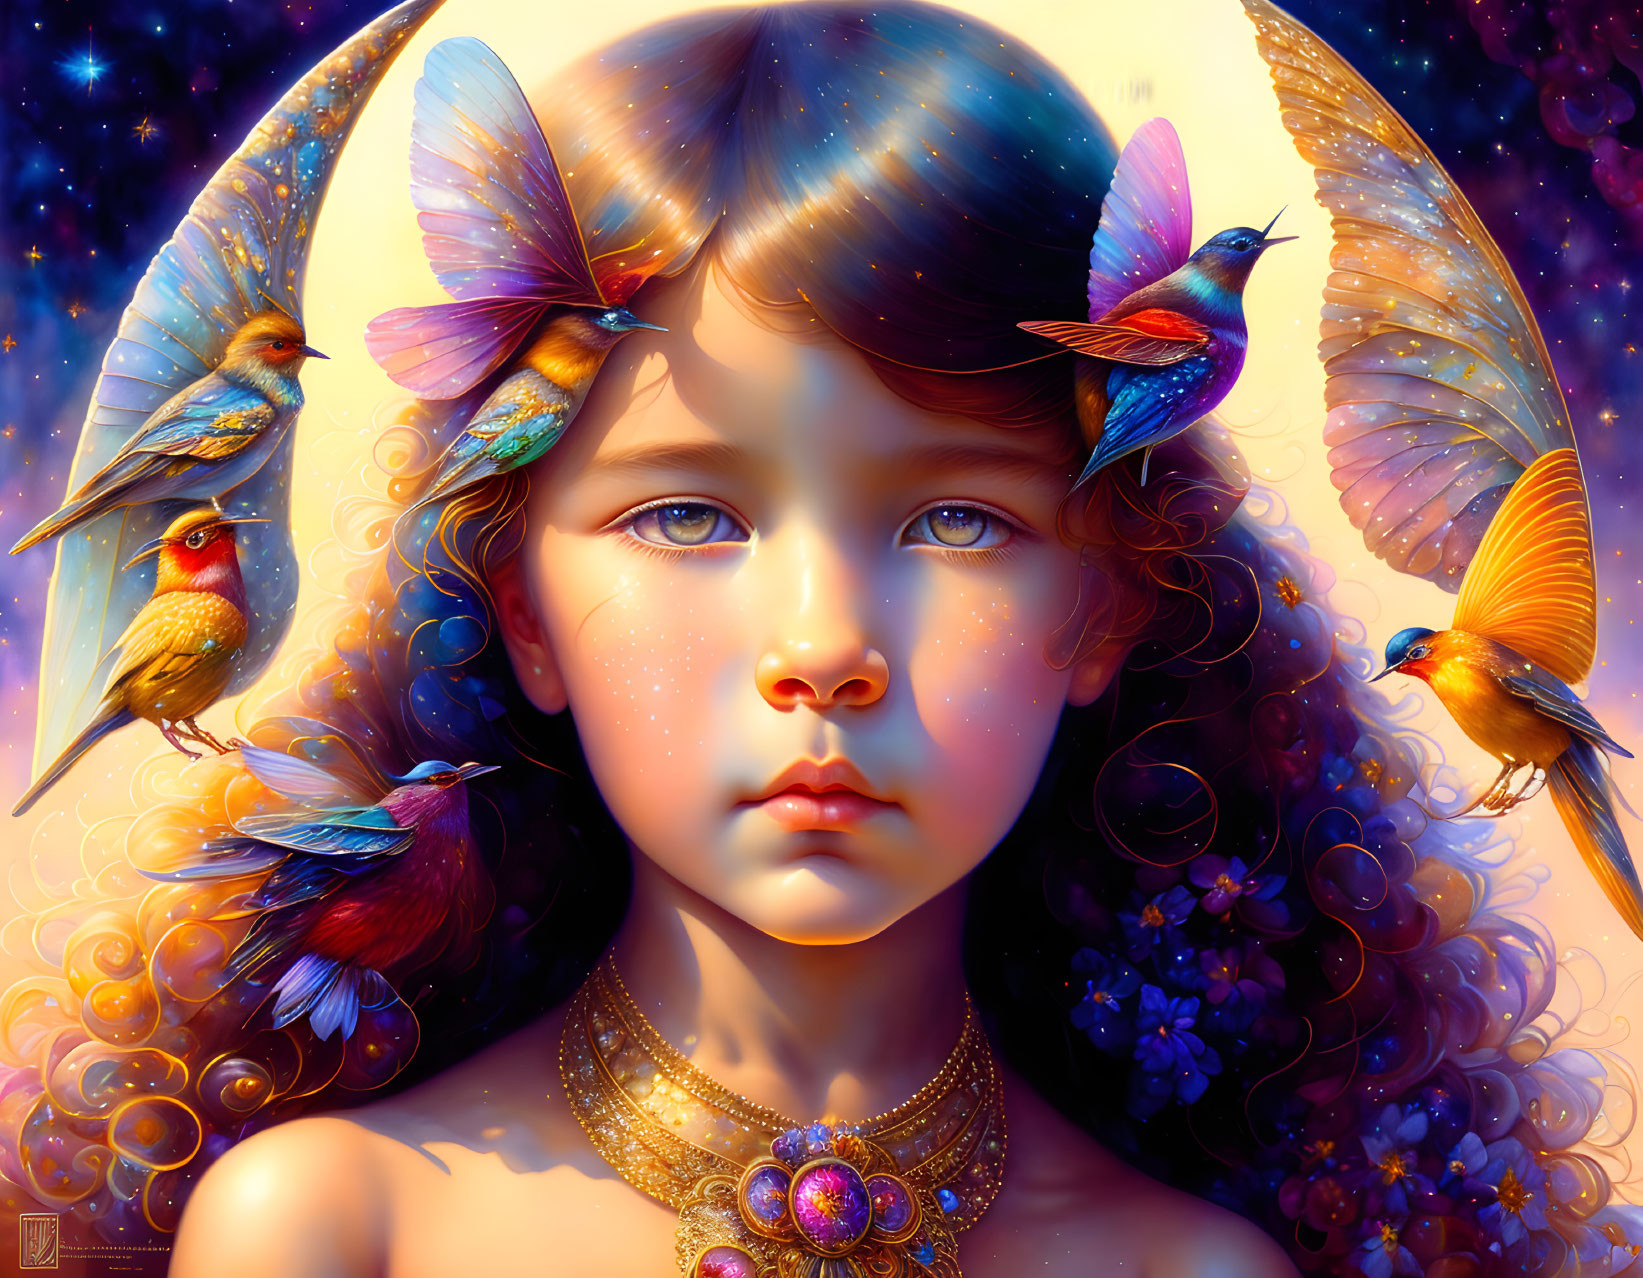 Colorful Child with Birds and Butterfly Wings in Starry Scene